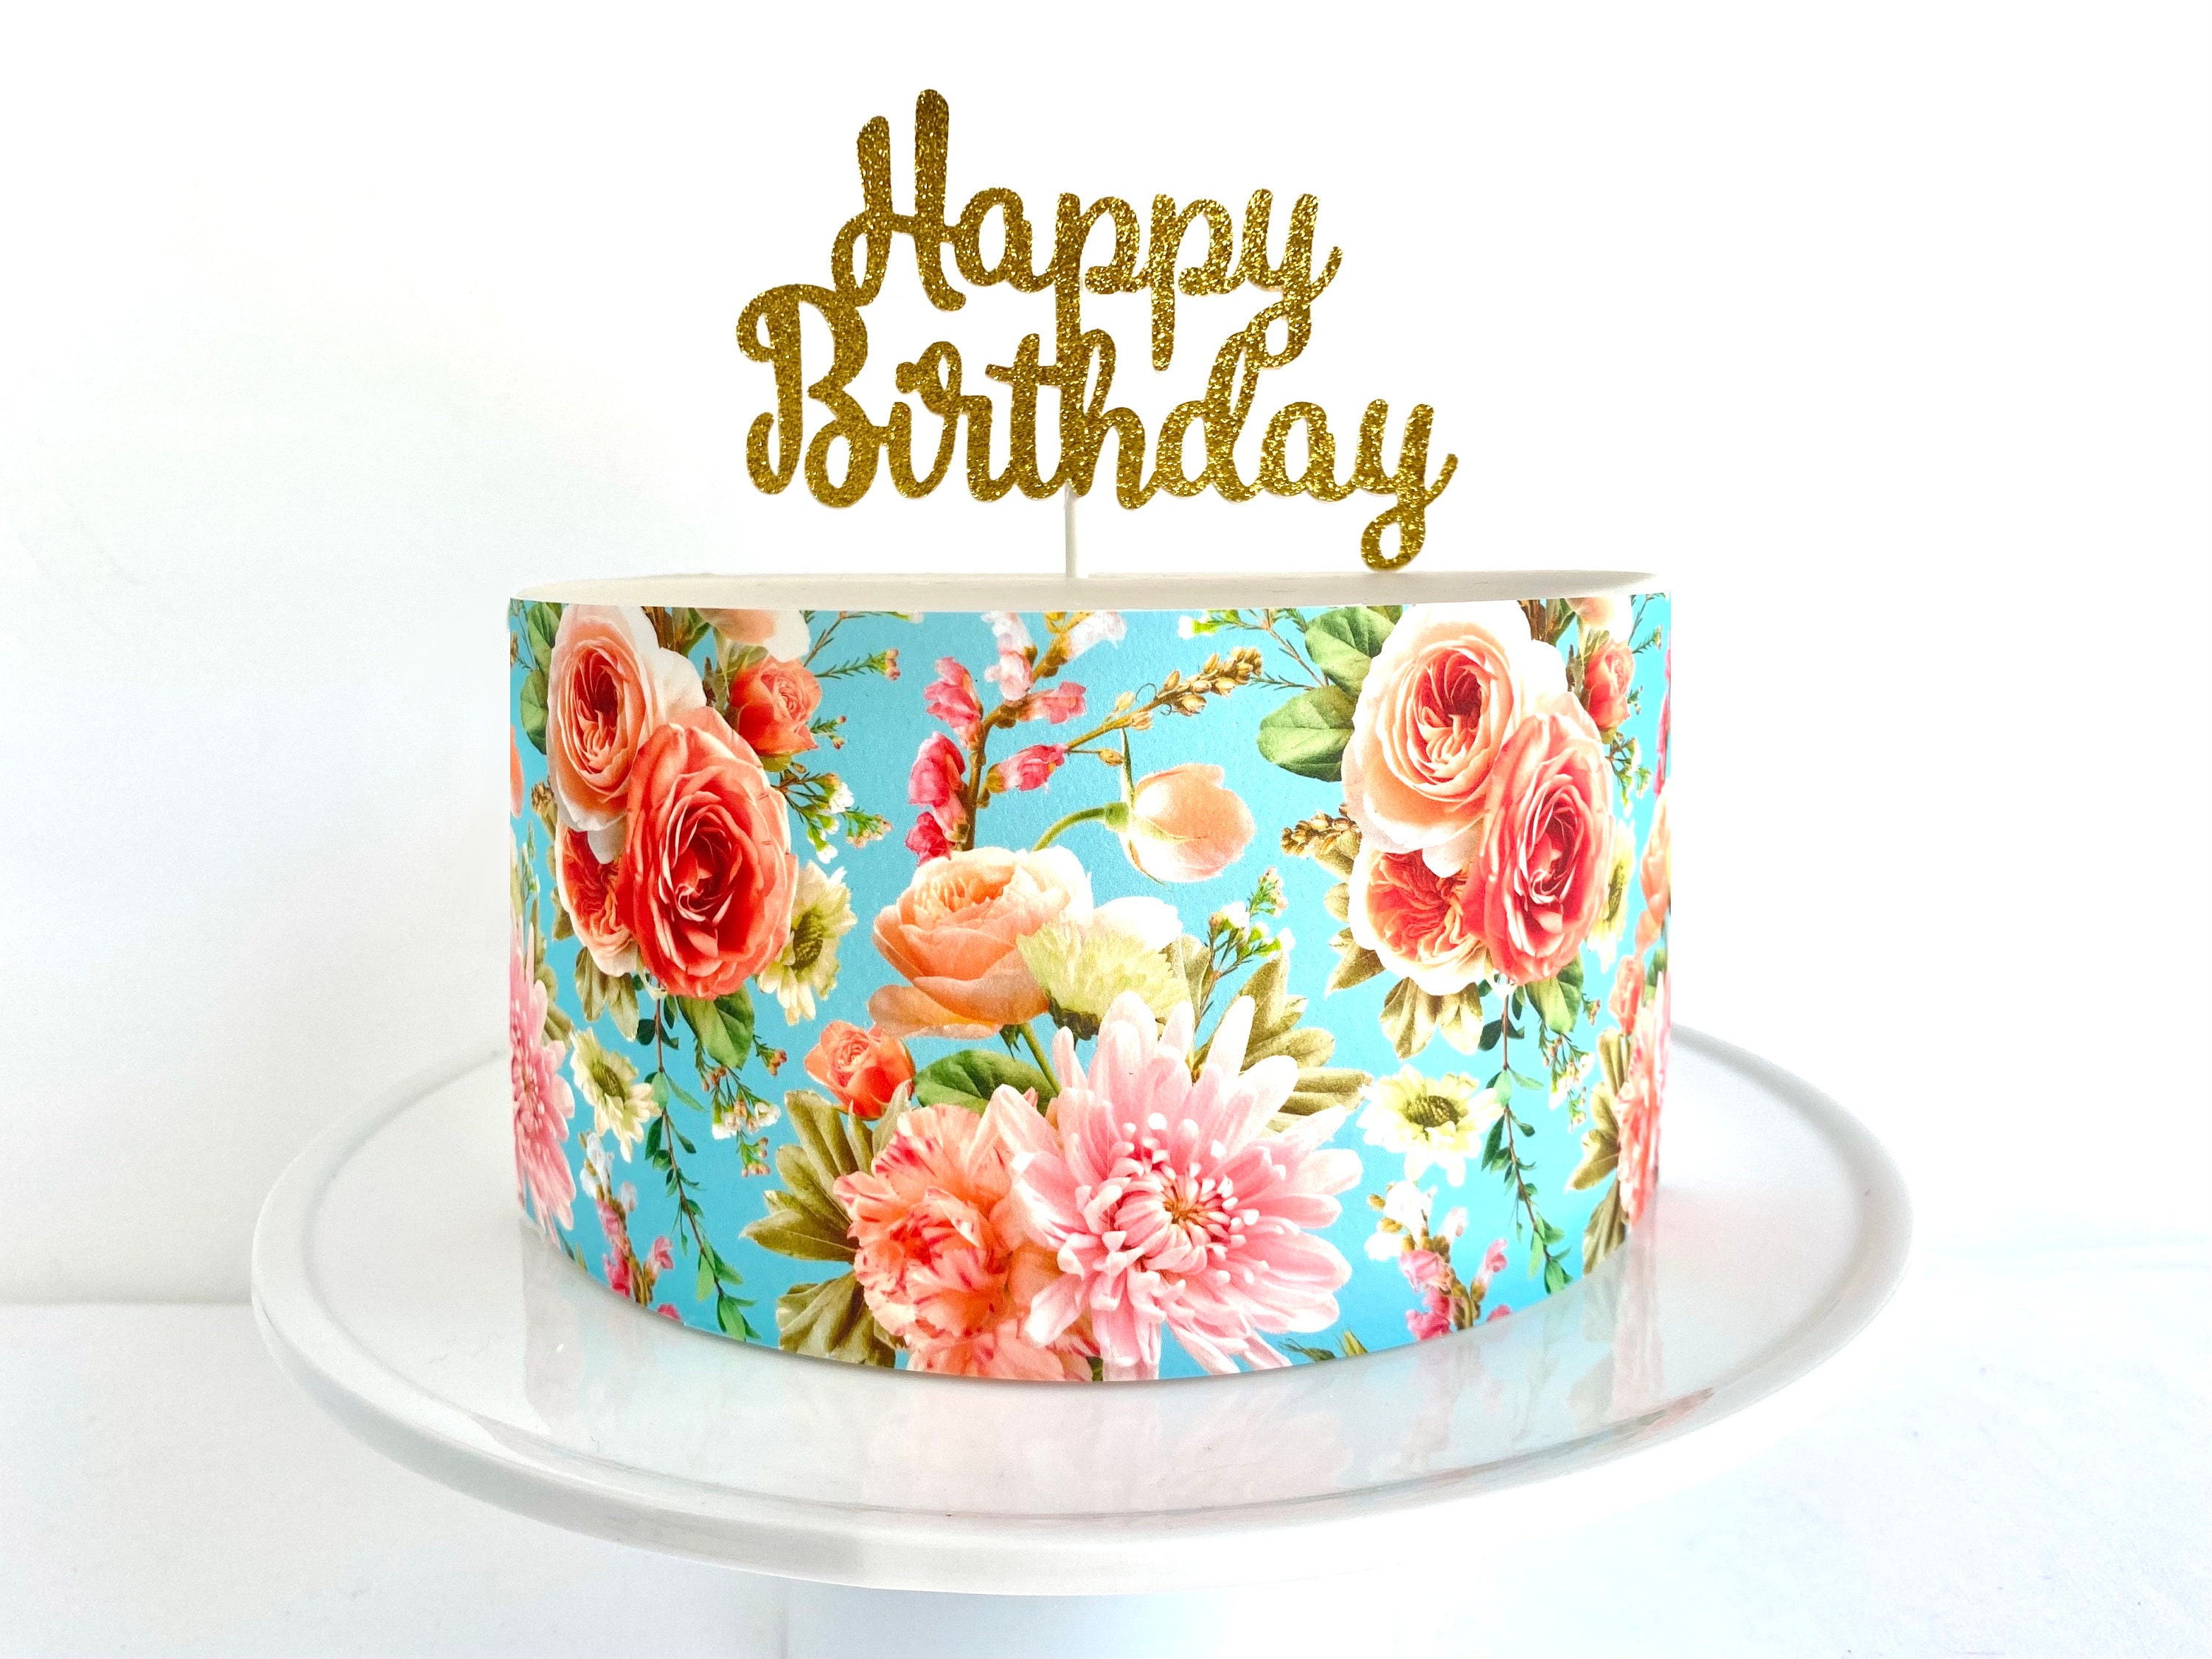 Age 40 - 40th Birthday - Greeting Card - Cake / Flowers – Made To Be  Treasured